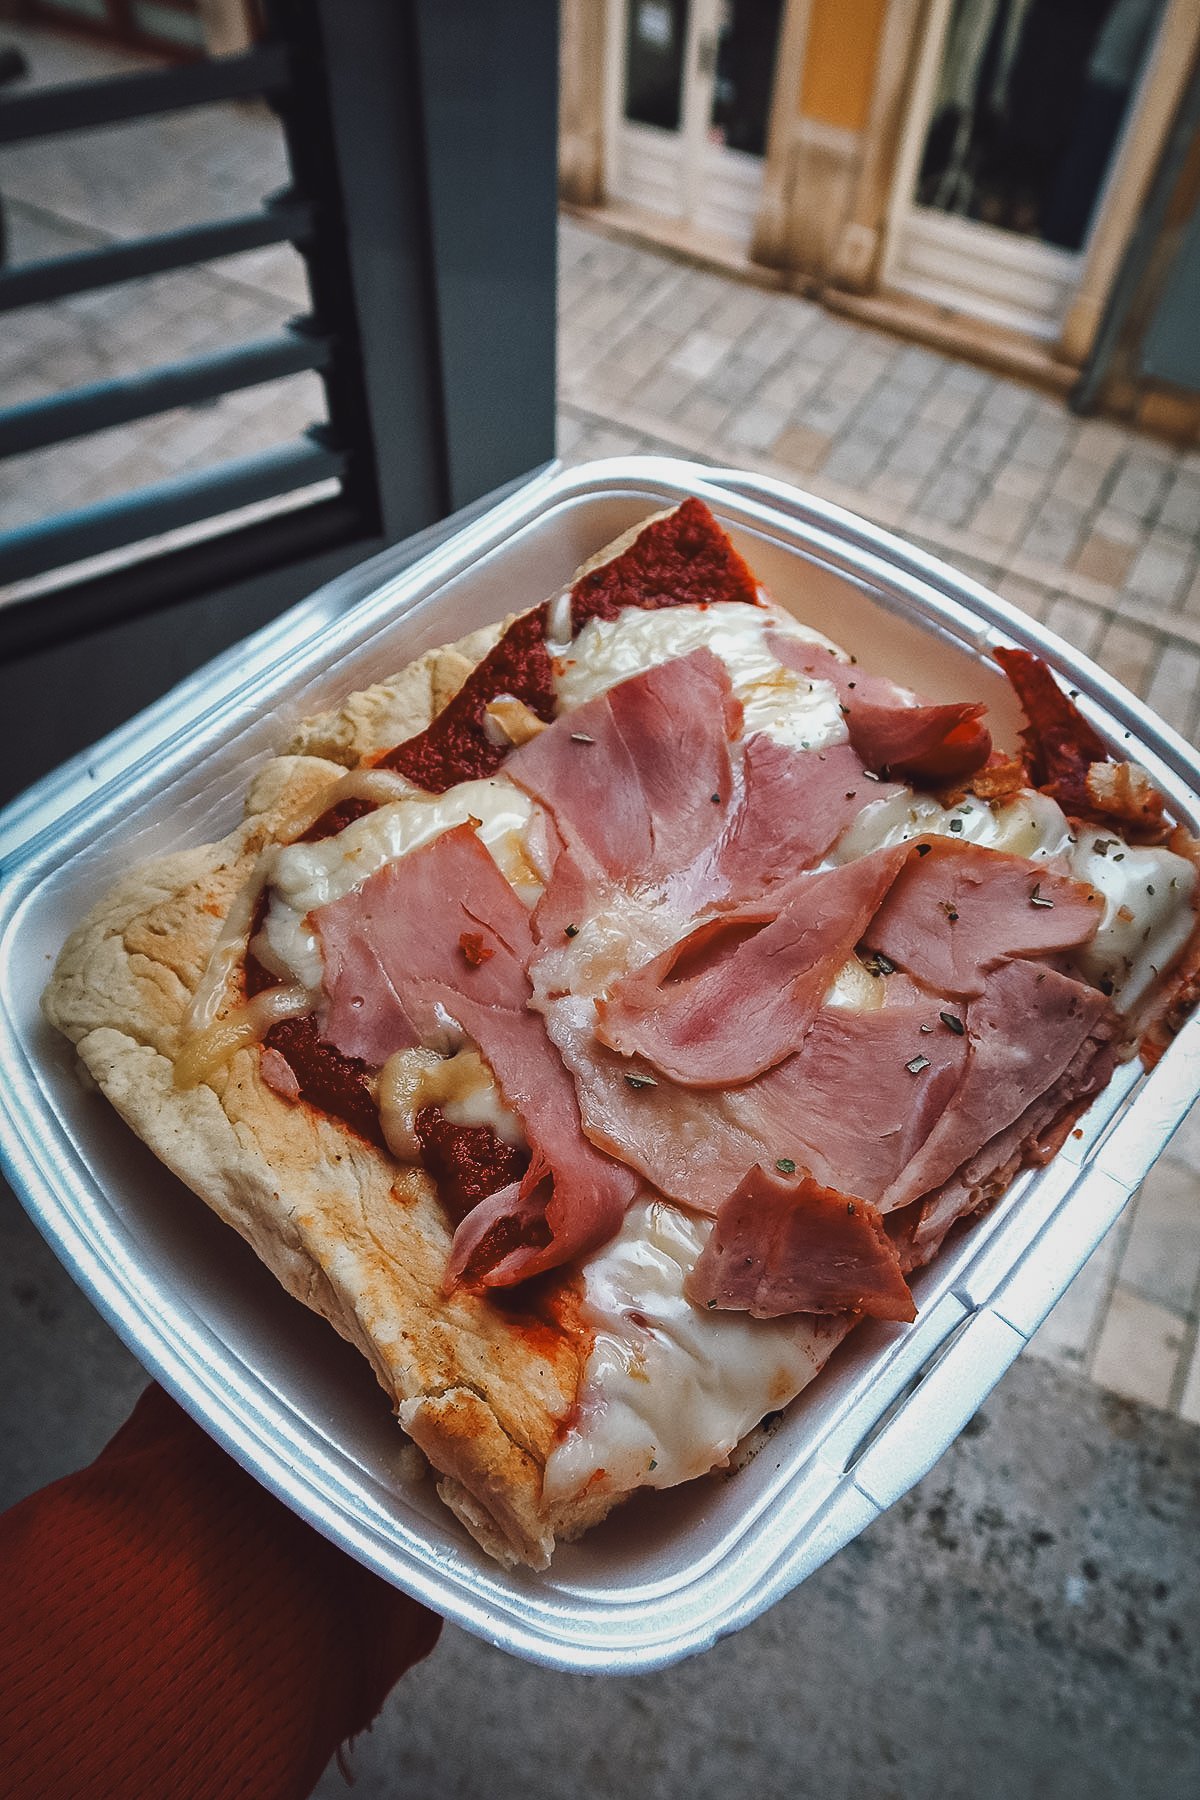 Pizza from a restaurant in Rovinj